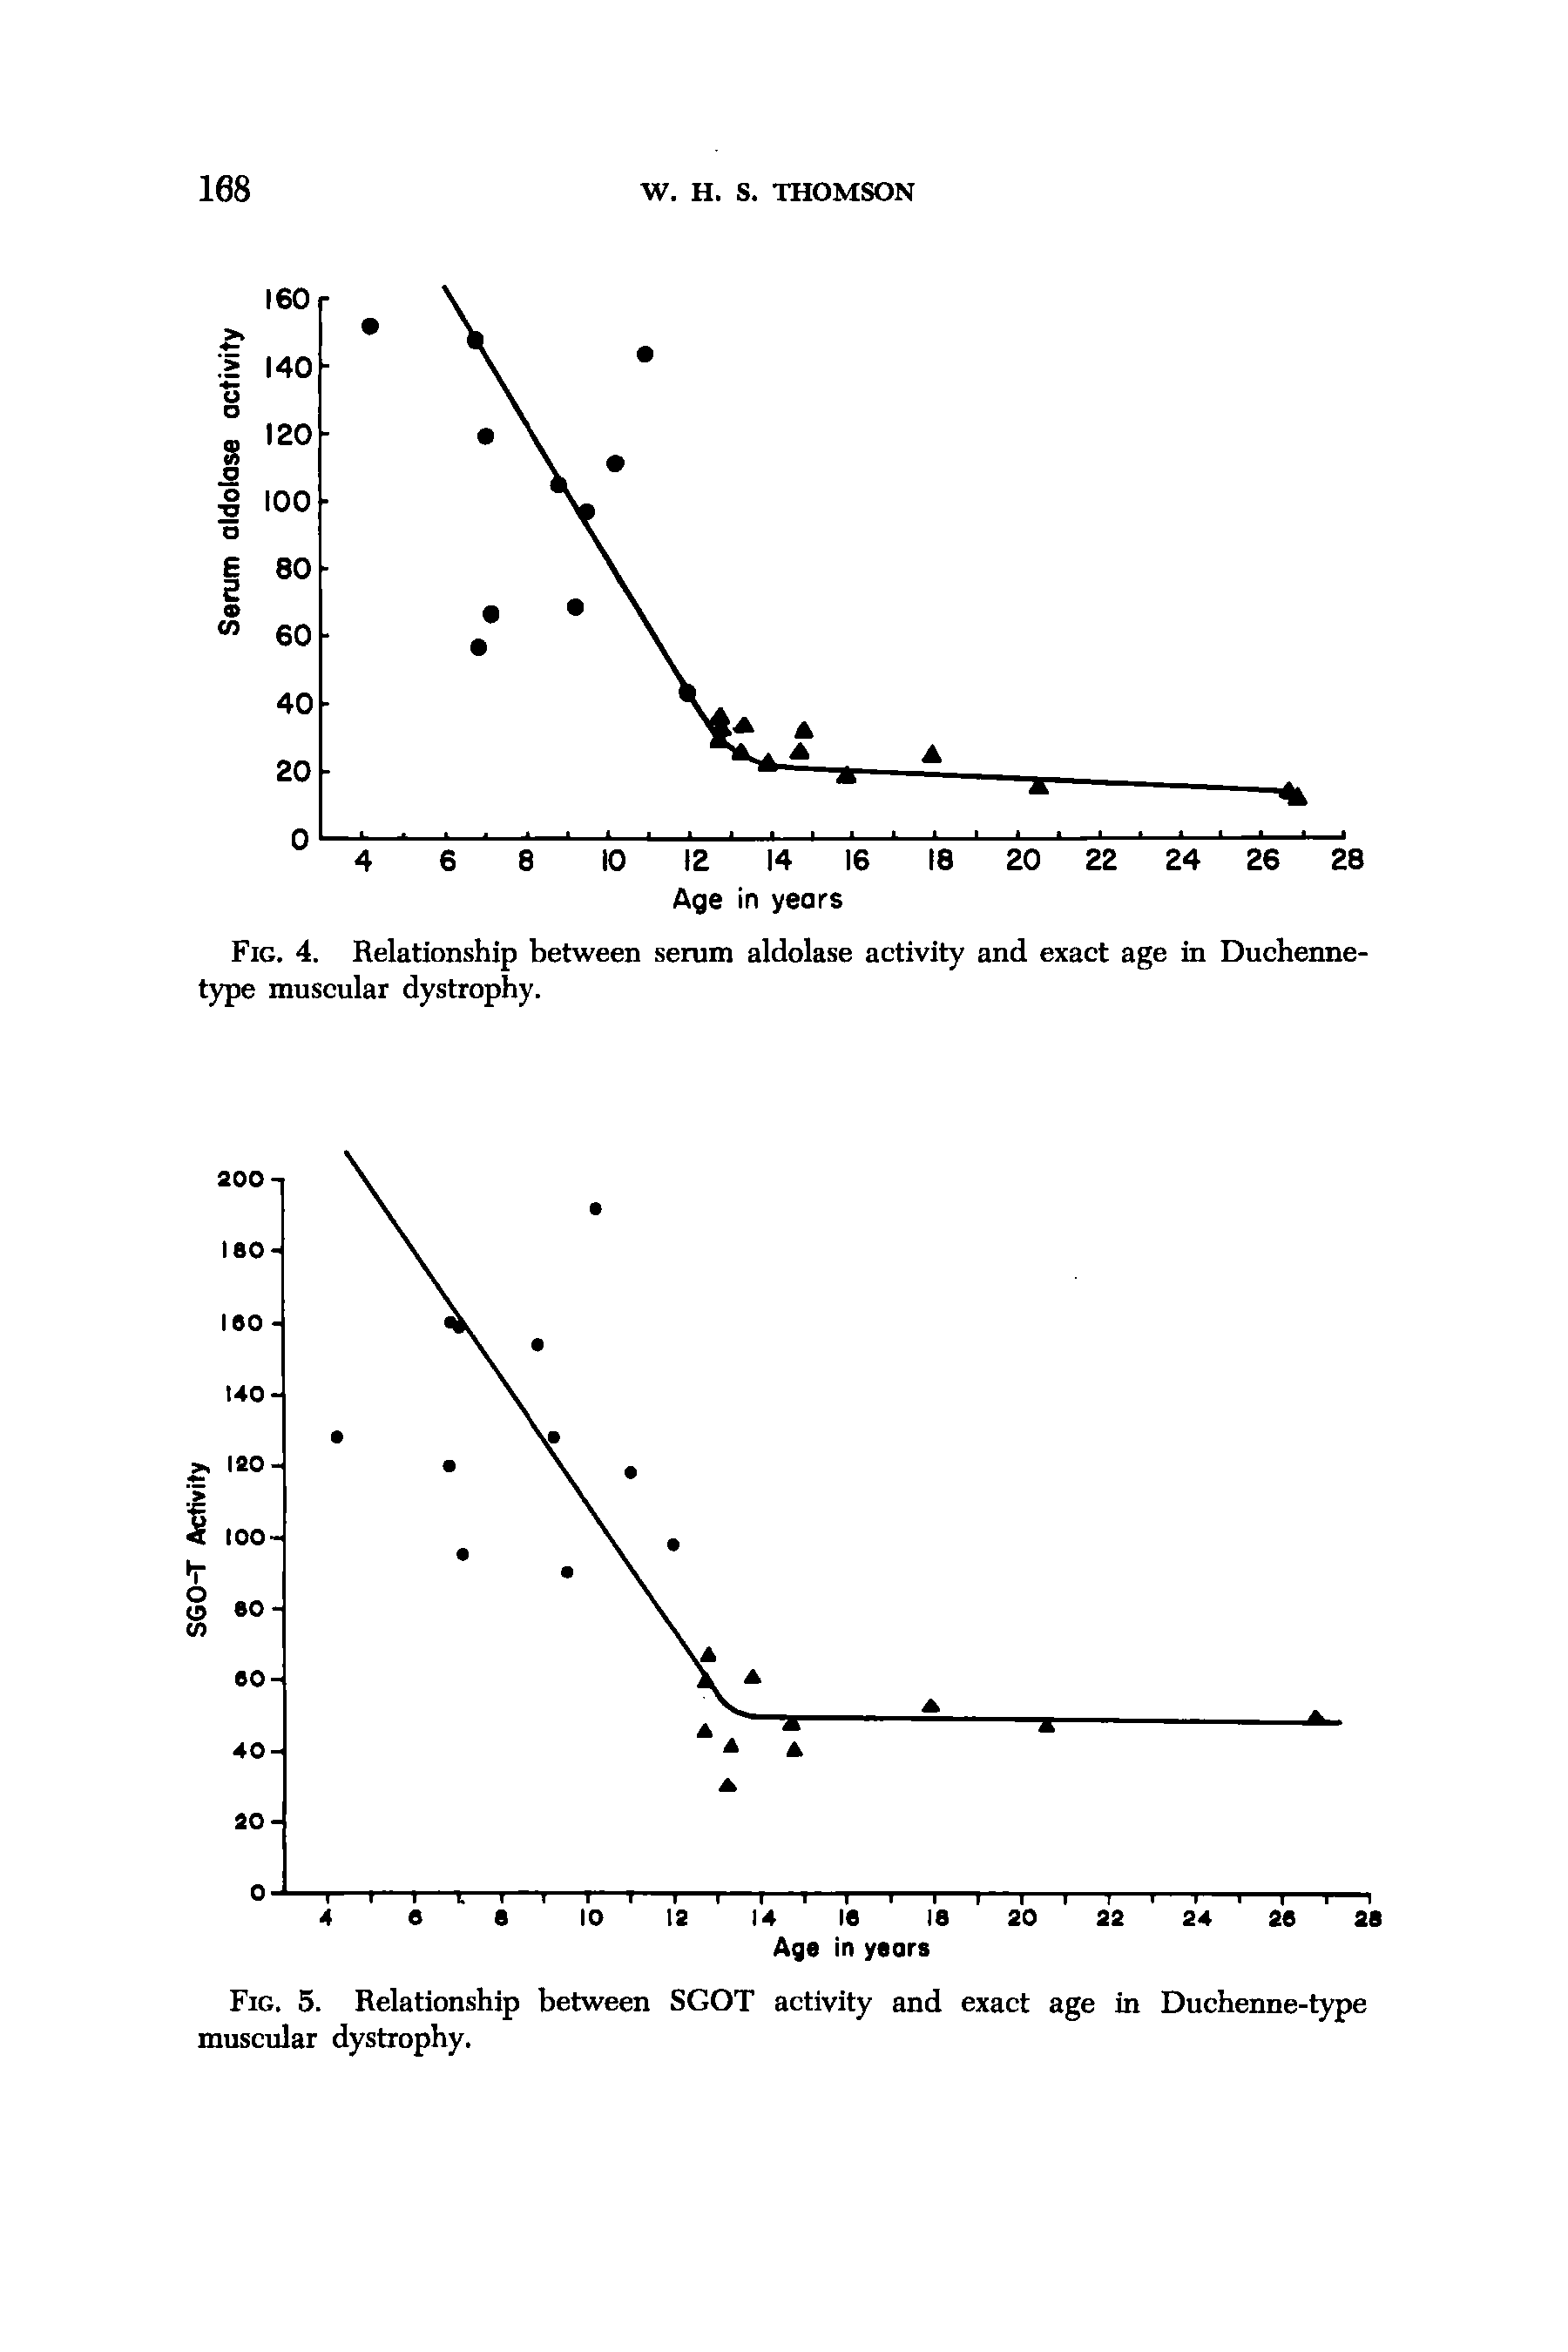 Fig. 4. Relationship between serum aldolase activity and exact age in Duchenne-type muscular dystrophy.